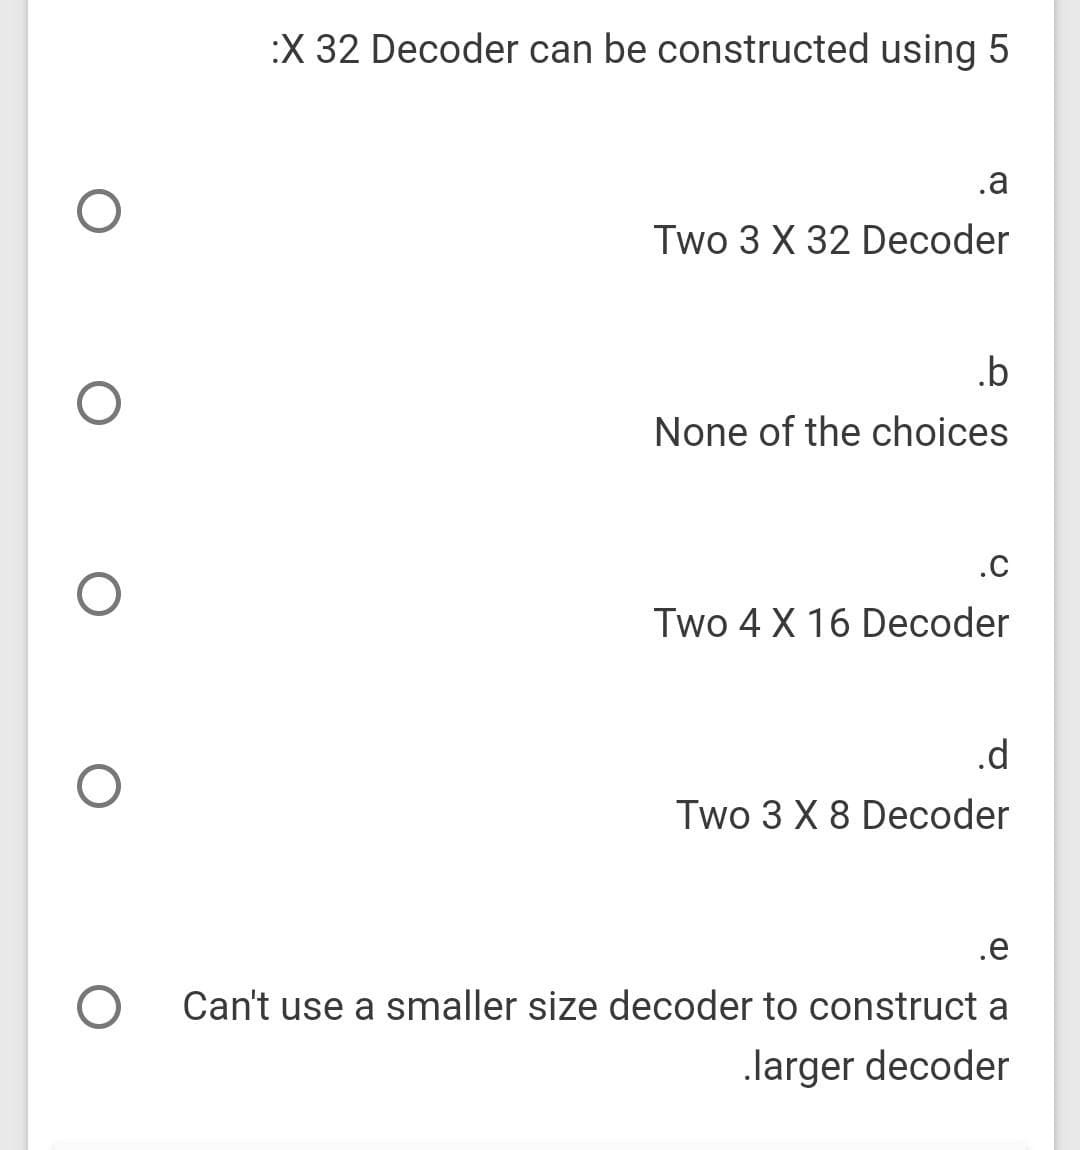 :X 32 Decoder can be constructed using 5
.a
Two 3 X 32 Decoder
.b
None of the choices
.C
Two 4 X 16 Decoder
.d
Two 3 X 8 Decoder
.e
Can't use a smaller size decoder to construct a
.larger decoder
